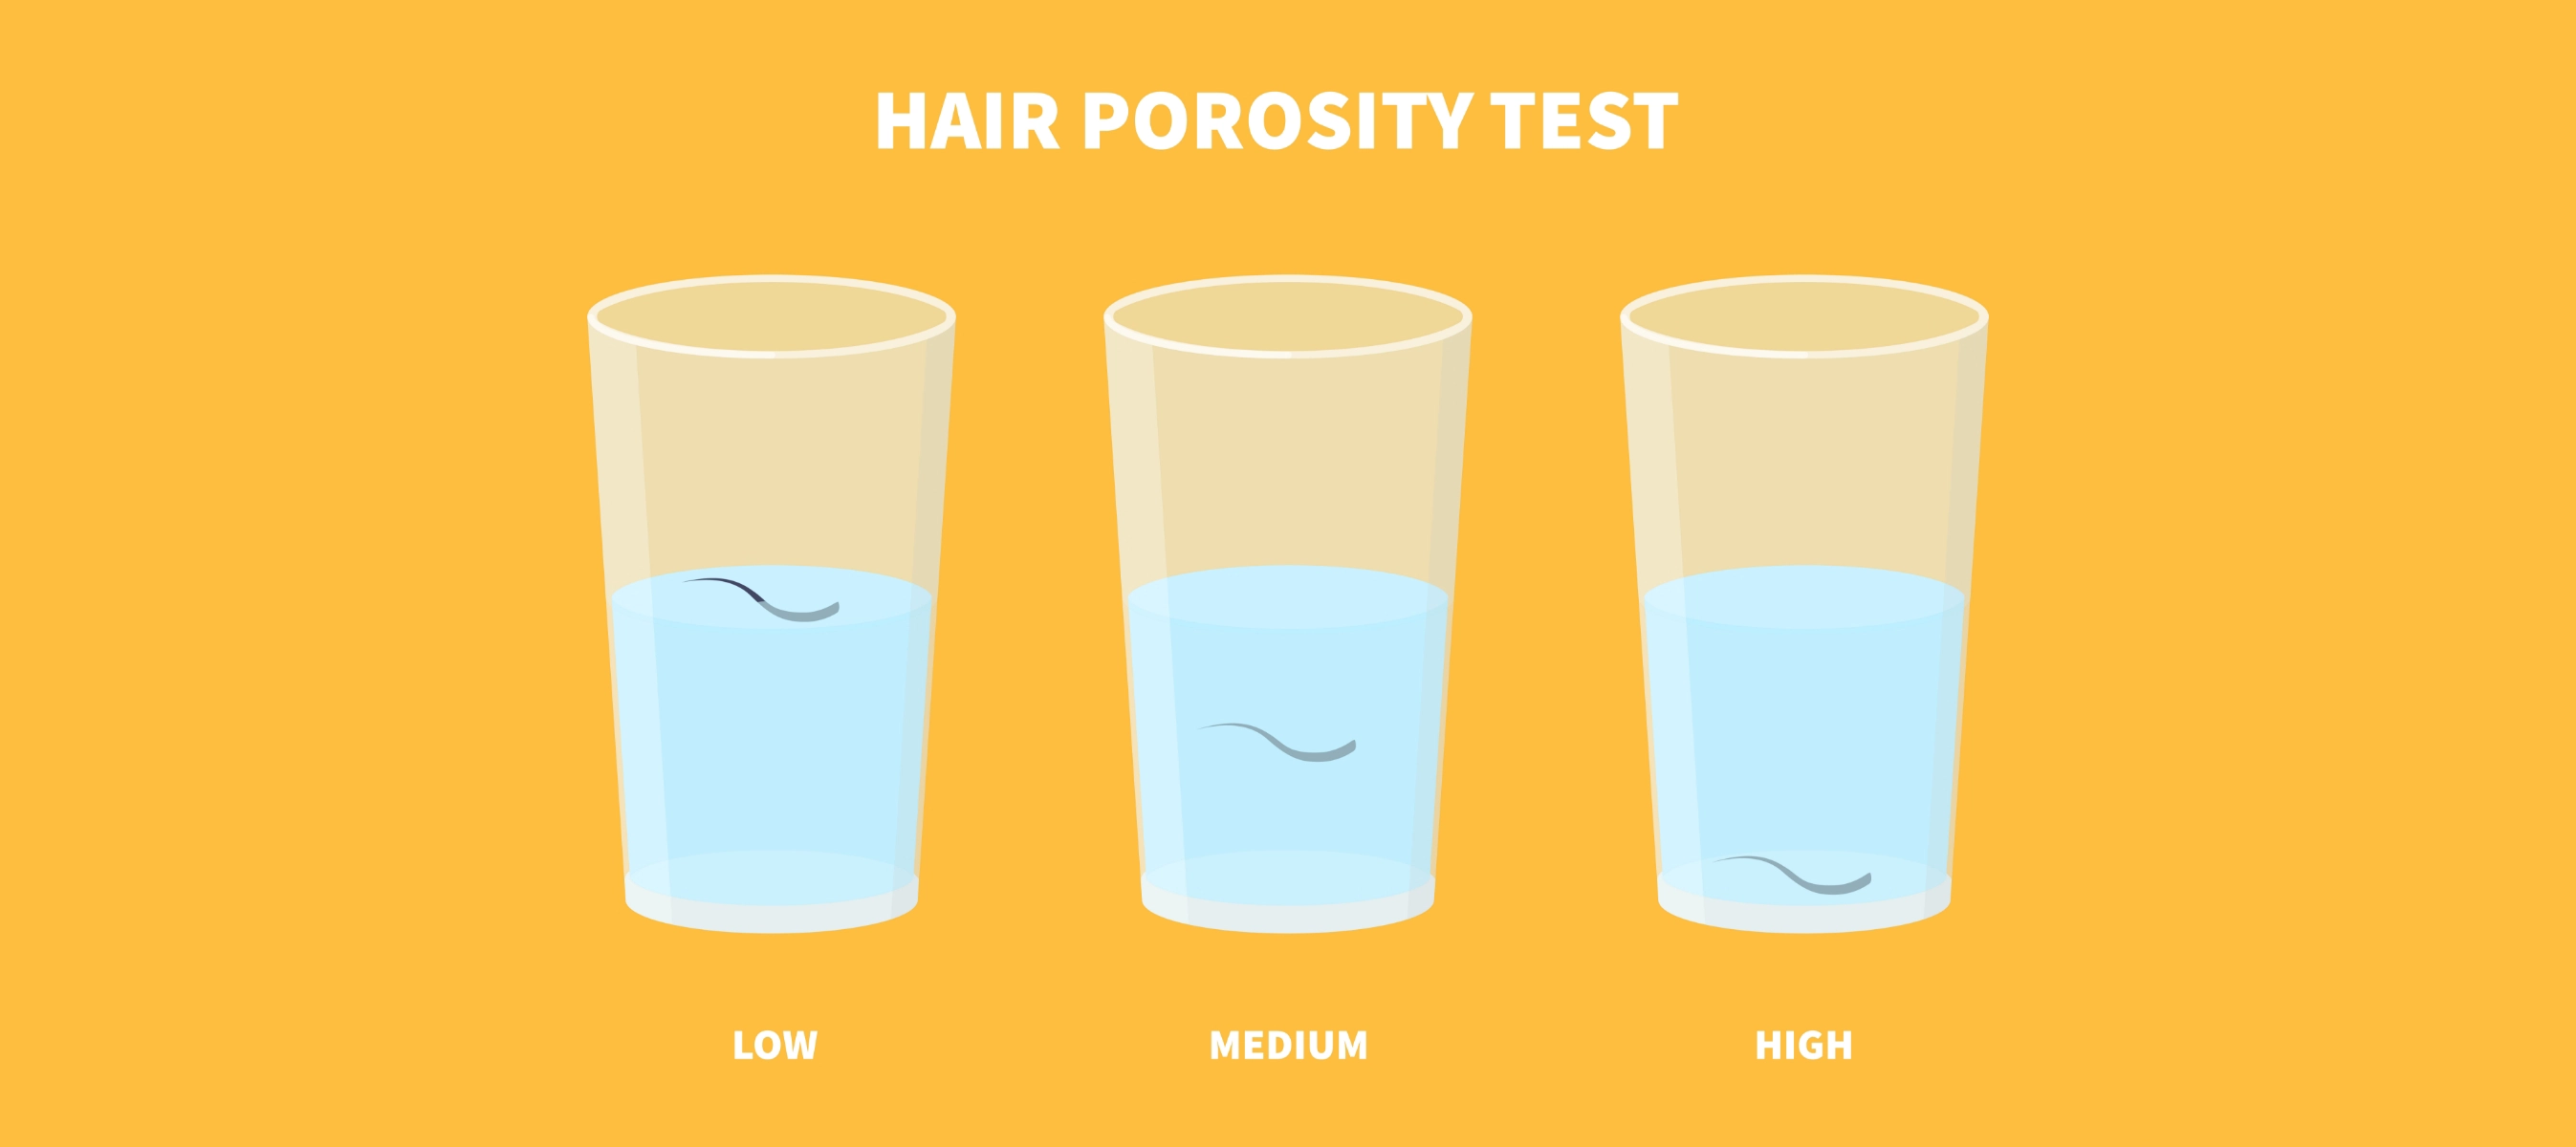 Hair porosity test demonstration, 3 drawings of water with a strand of hair in each one